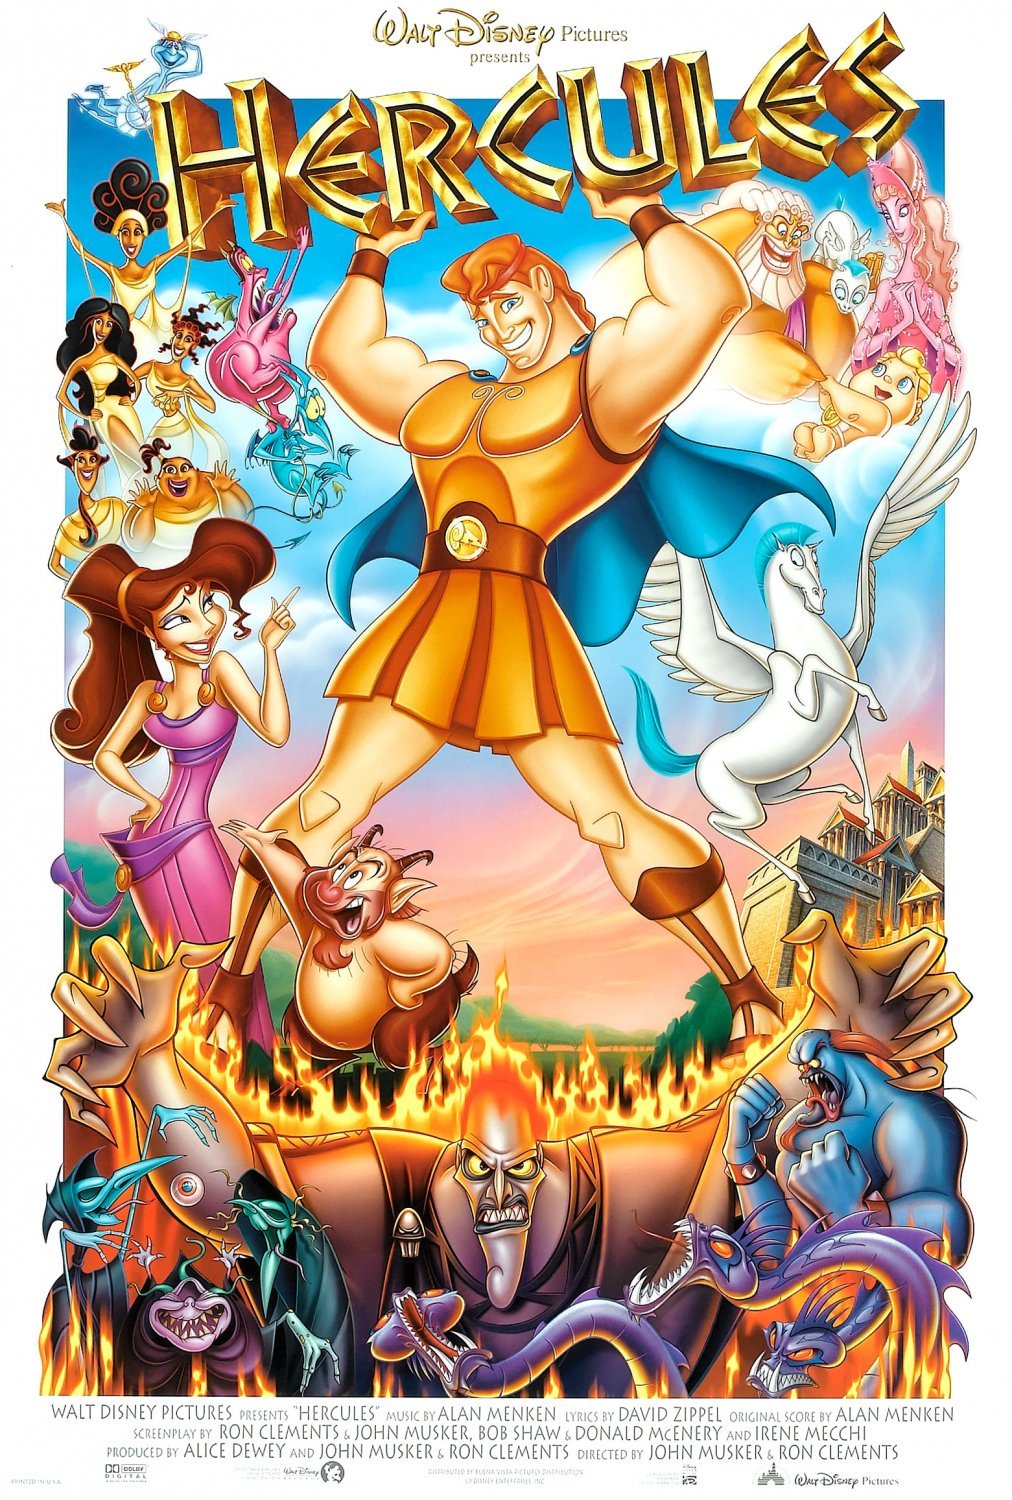 Poster of the movie Hercules